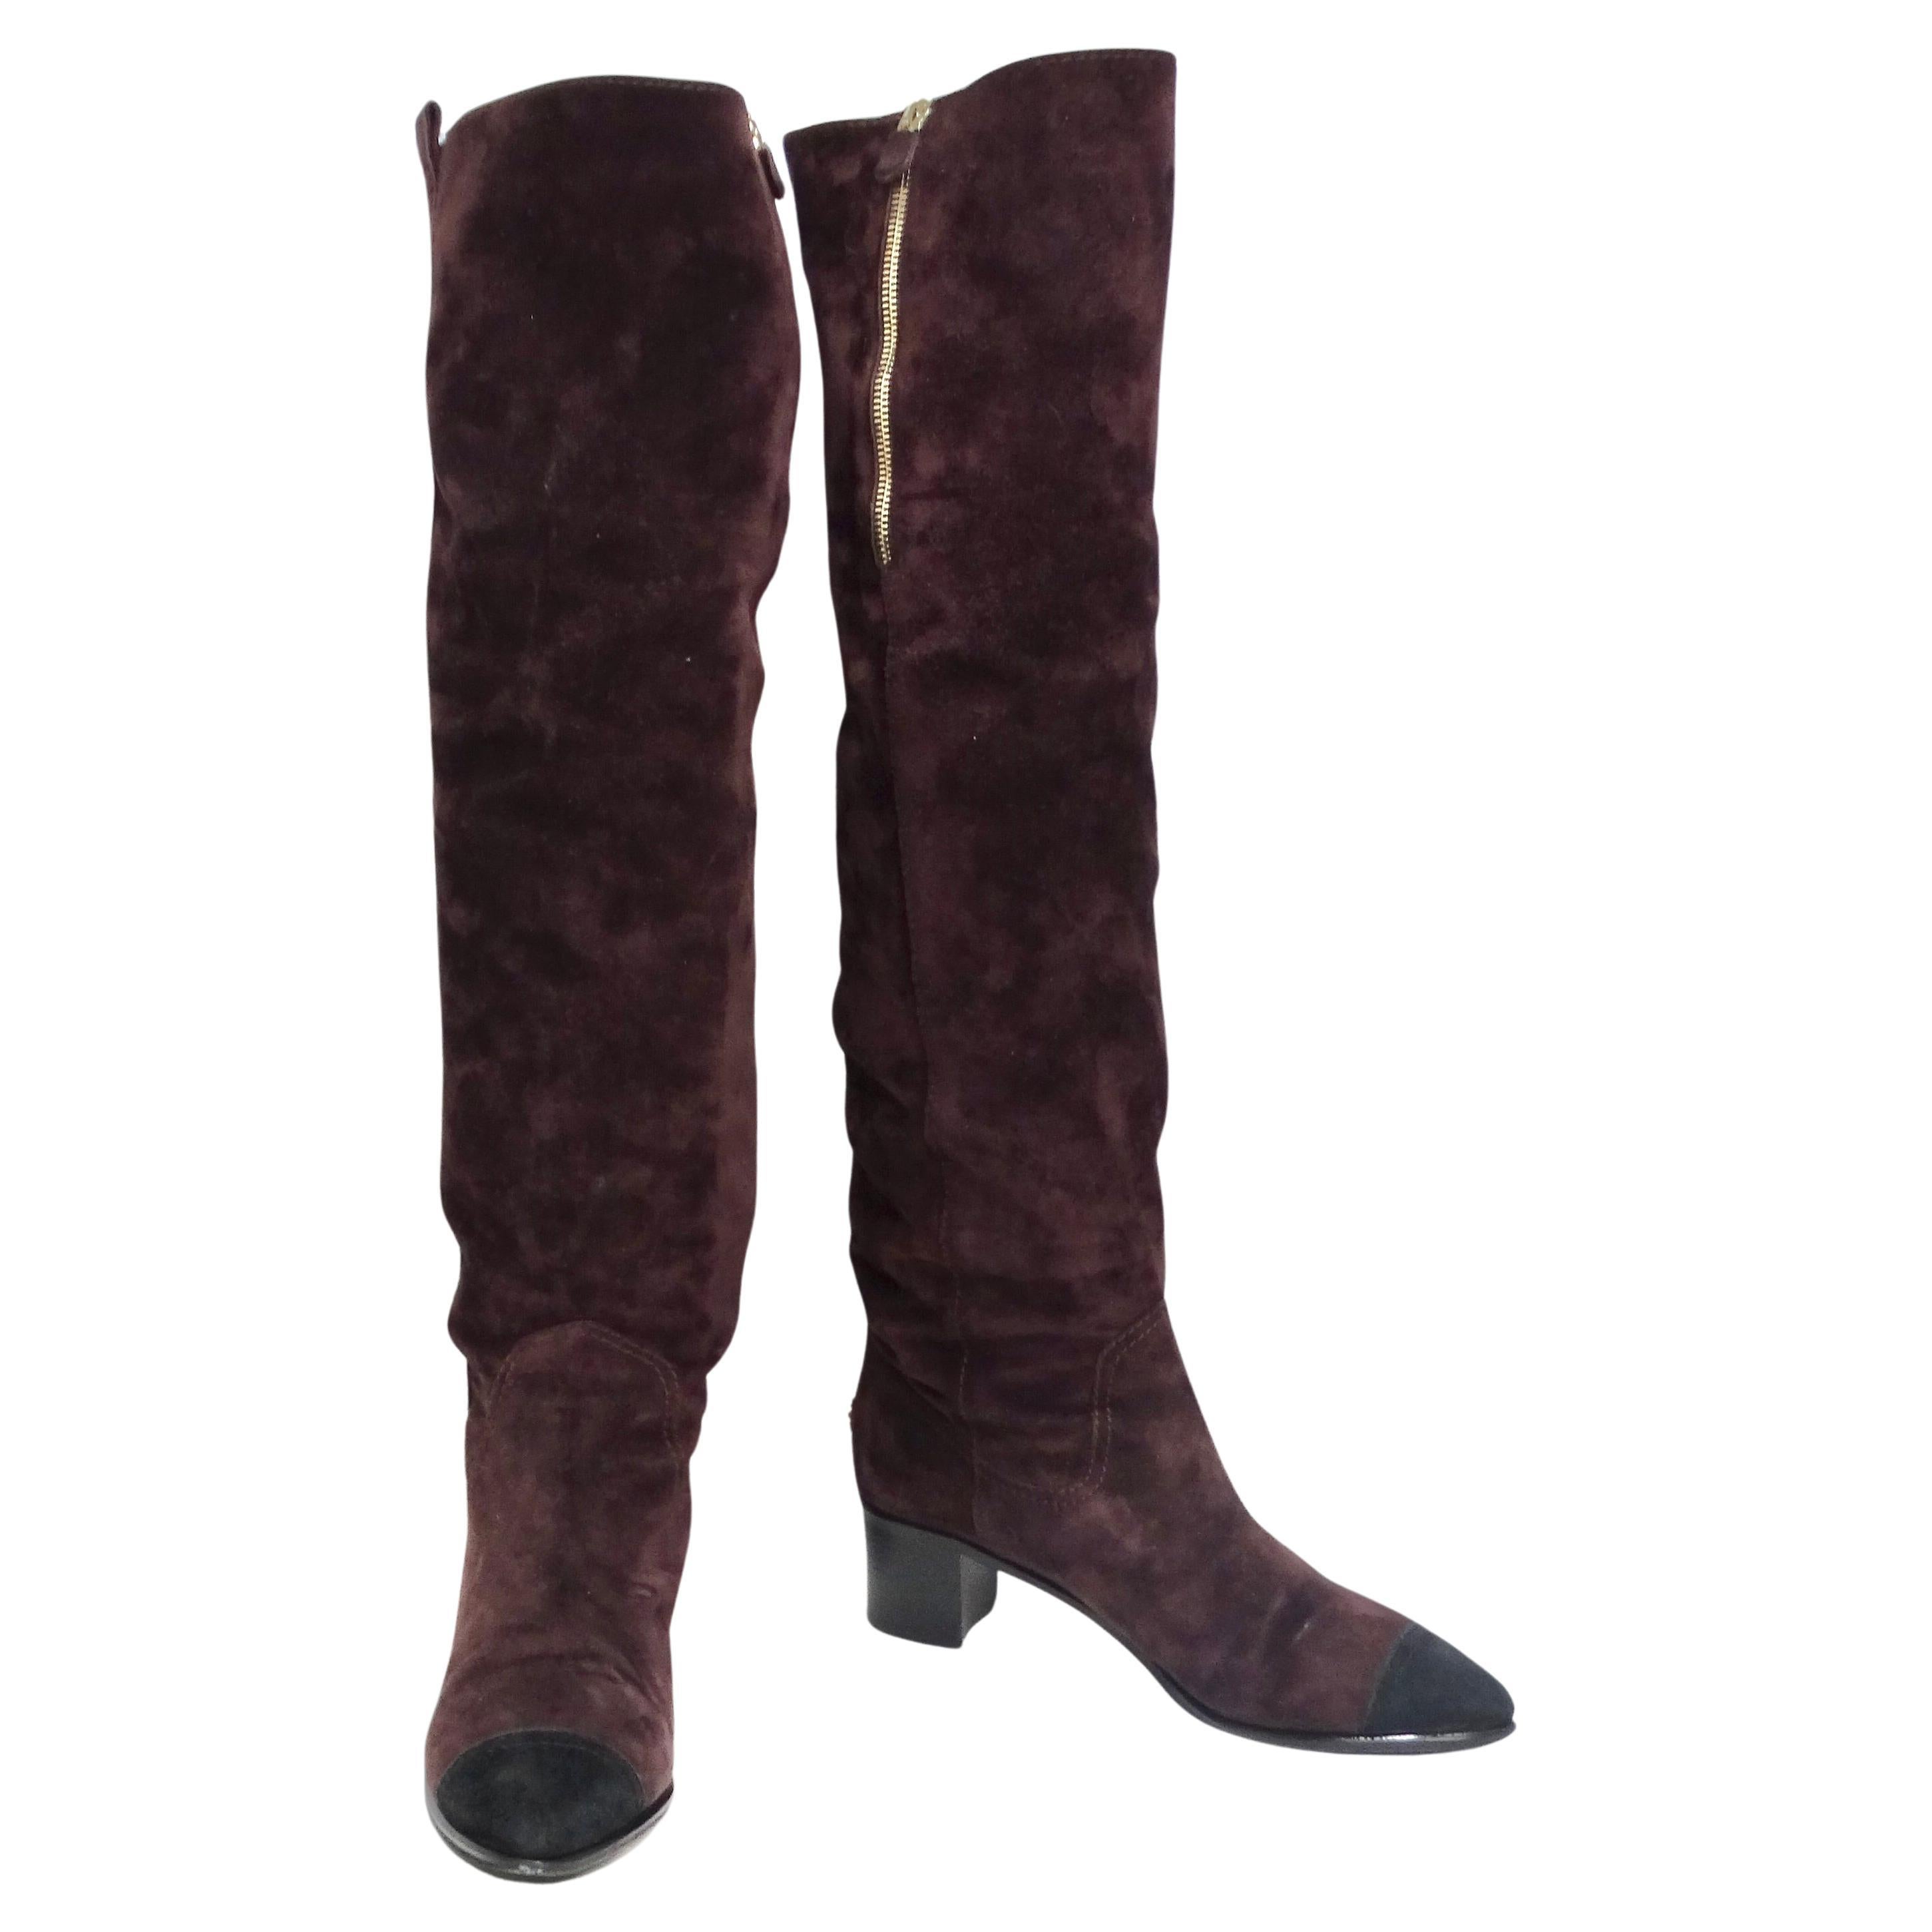 Burgundy Suede Cap Toe Over The Knee Boots For Sale